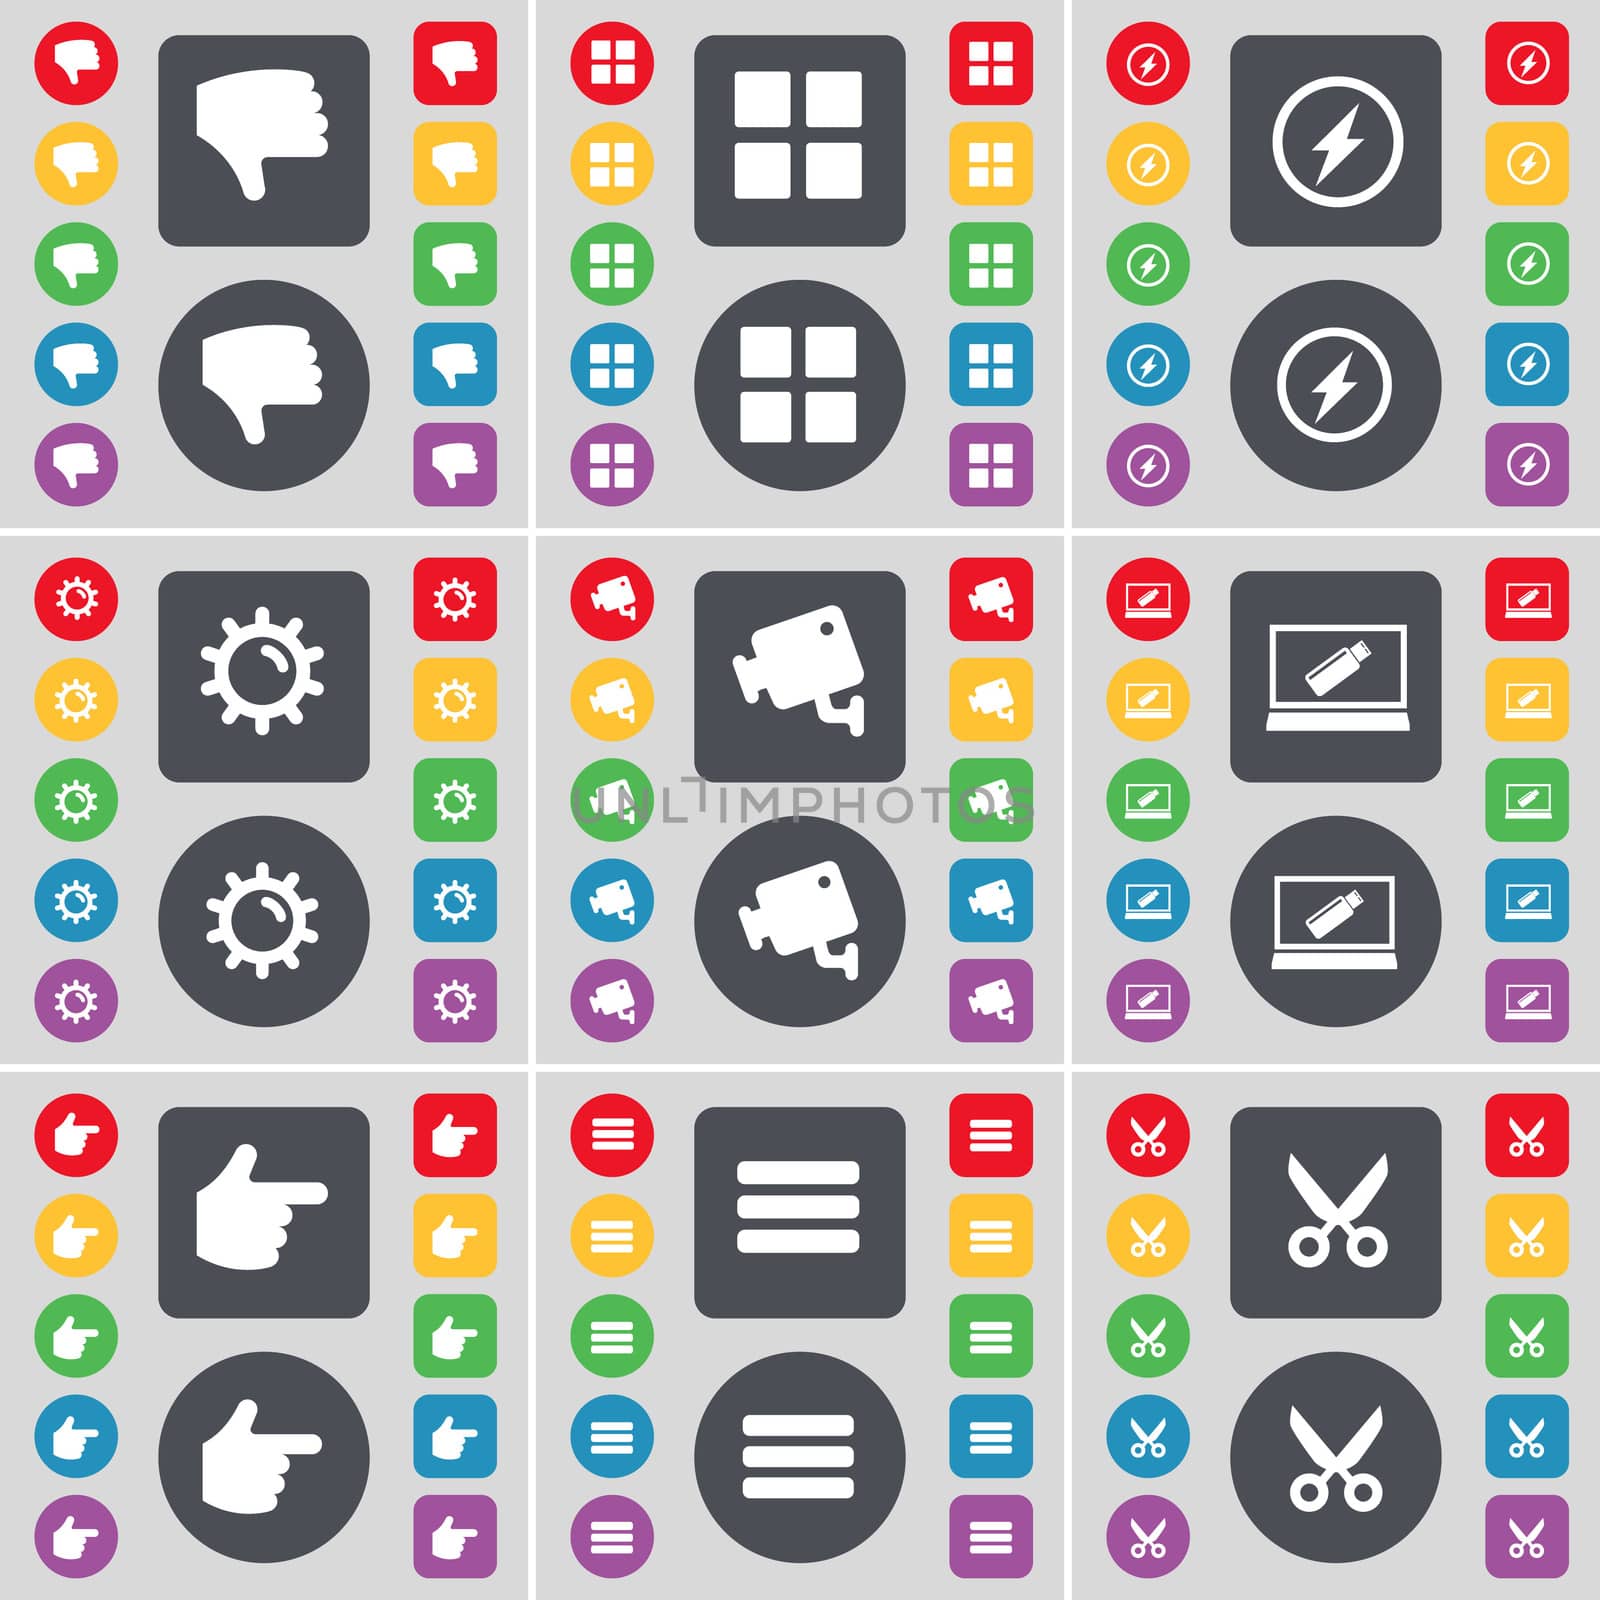 Dislike, Apps, Flash, Gear, CCTV, Laptop, Hand, Apps, Scissors icon symbol. A large set of flat, colored buttons for your design.  by serhii_lohvyniuk